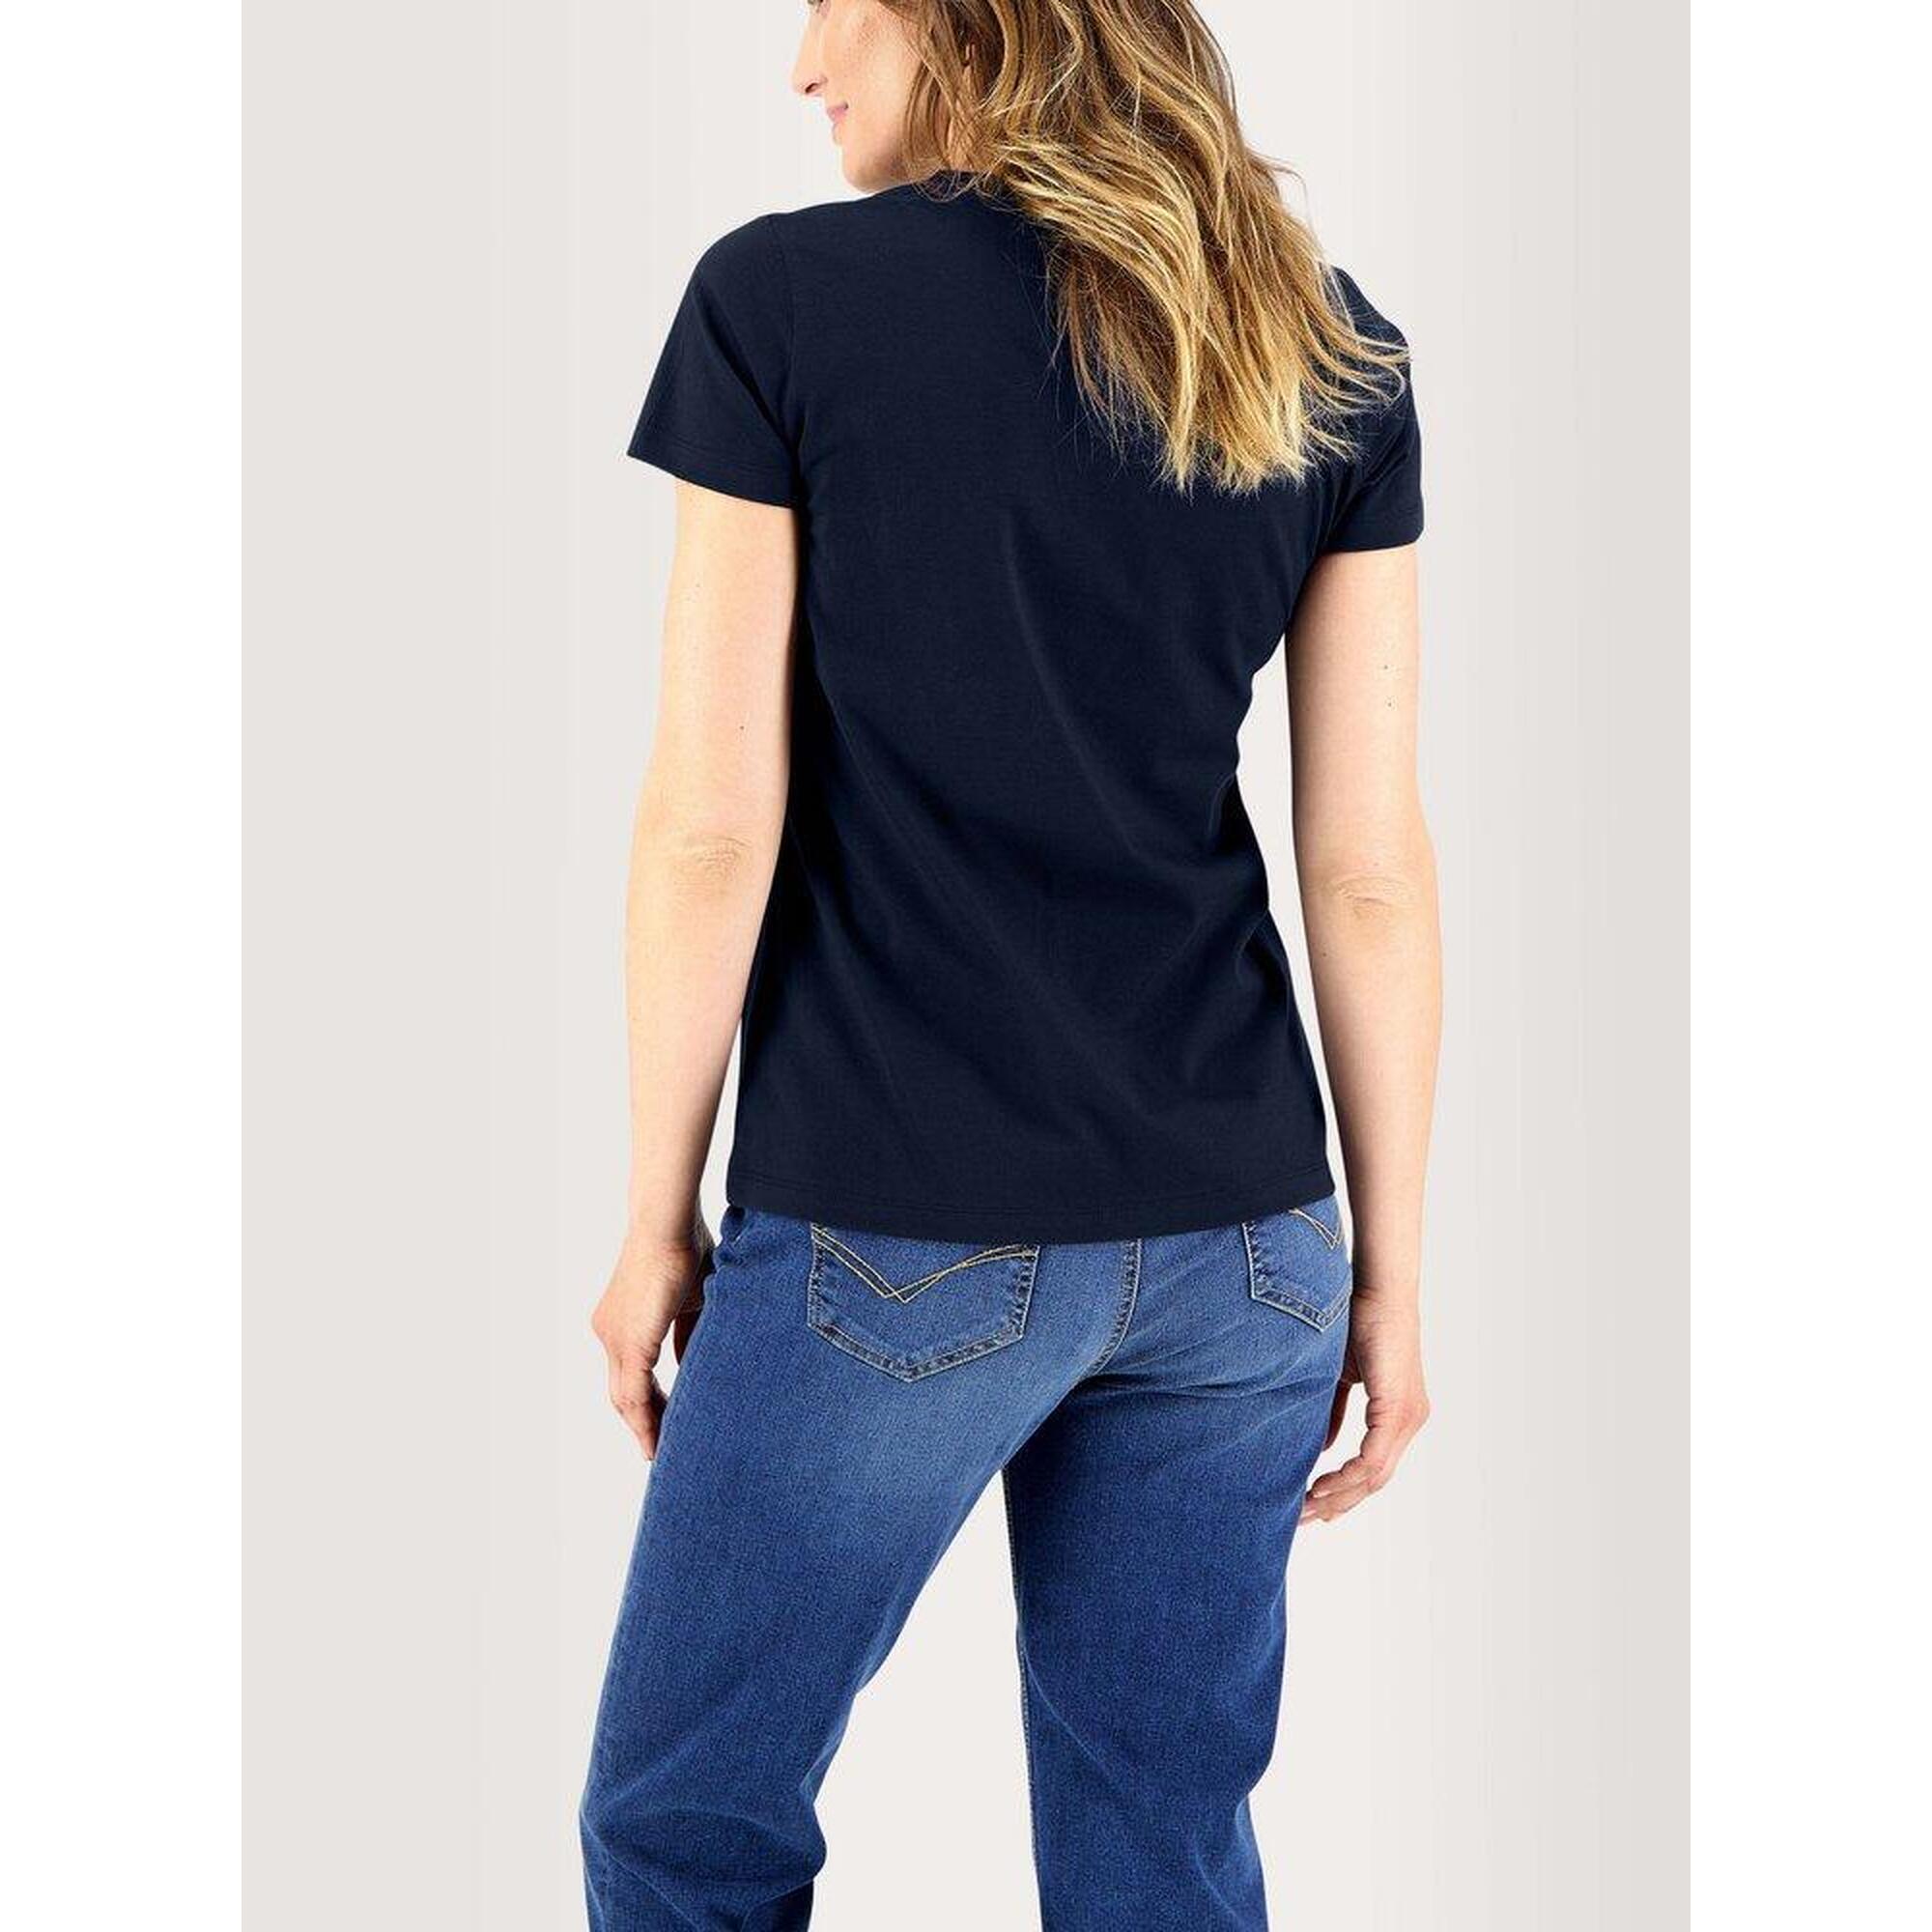 T-shirt manches courtes Femme - FAUSTTEE Navy